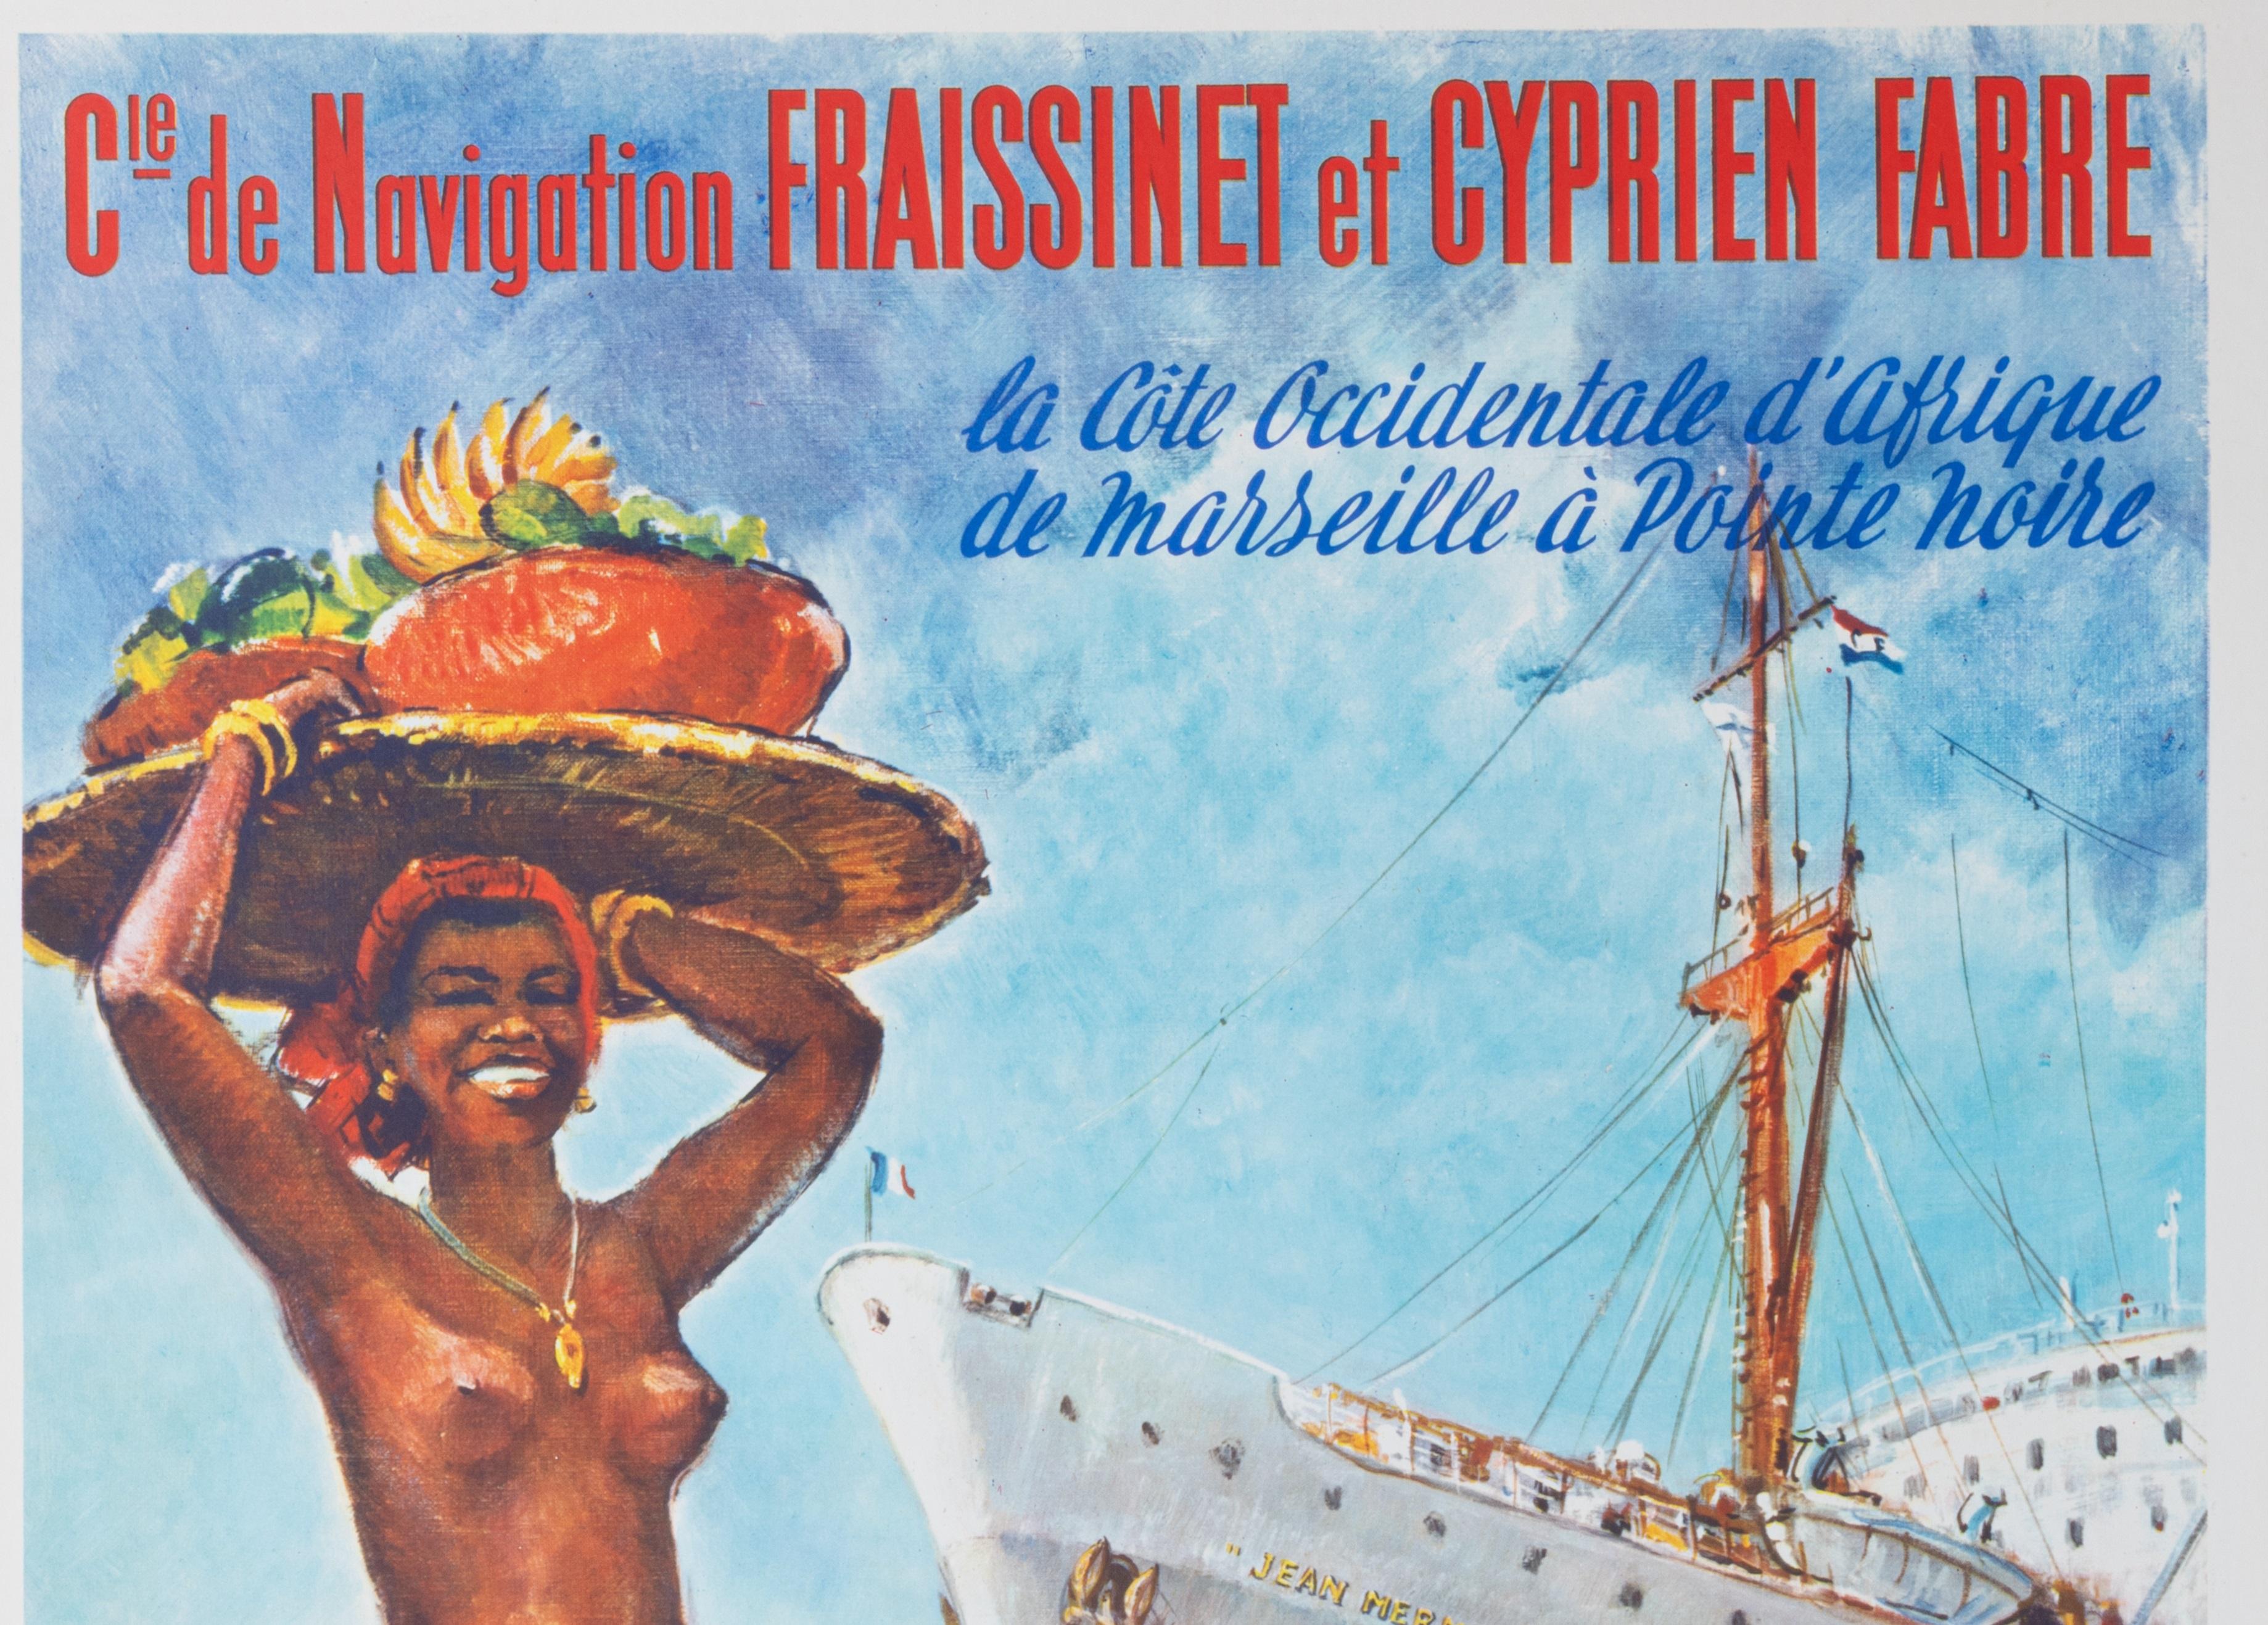 Poster of the Compagnie de Navigation Fraissinet et Cyprien Fabre created around 1960 by Maurice Fievet to promote maritime tourism to Africa.

Artist : Maurice Fievet
Title : Compagnie de Navigation Fraissinet et Cyprien Fabre – La Côte occidentale